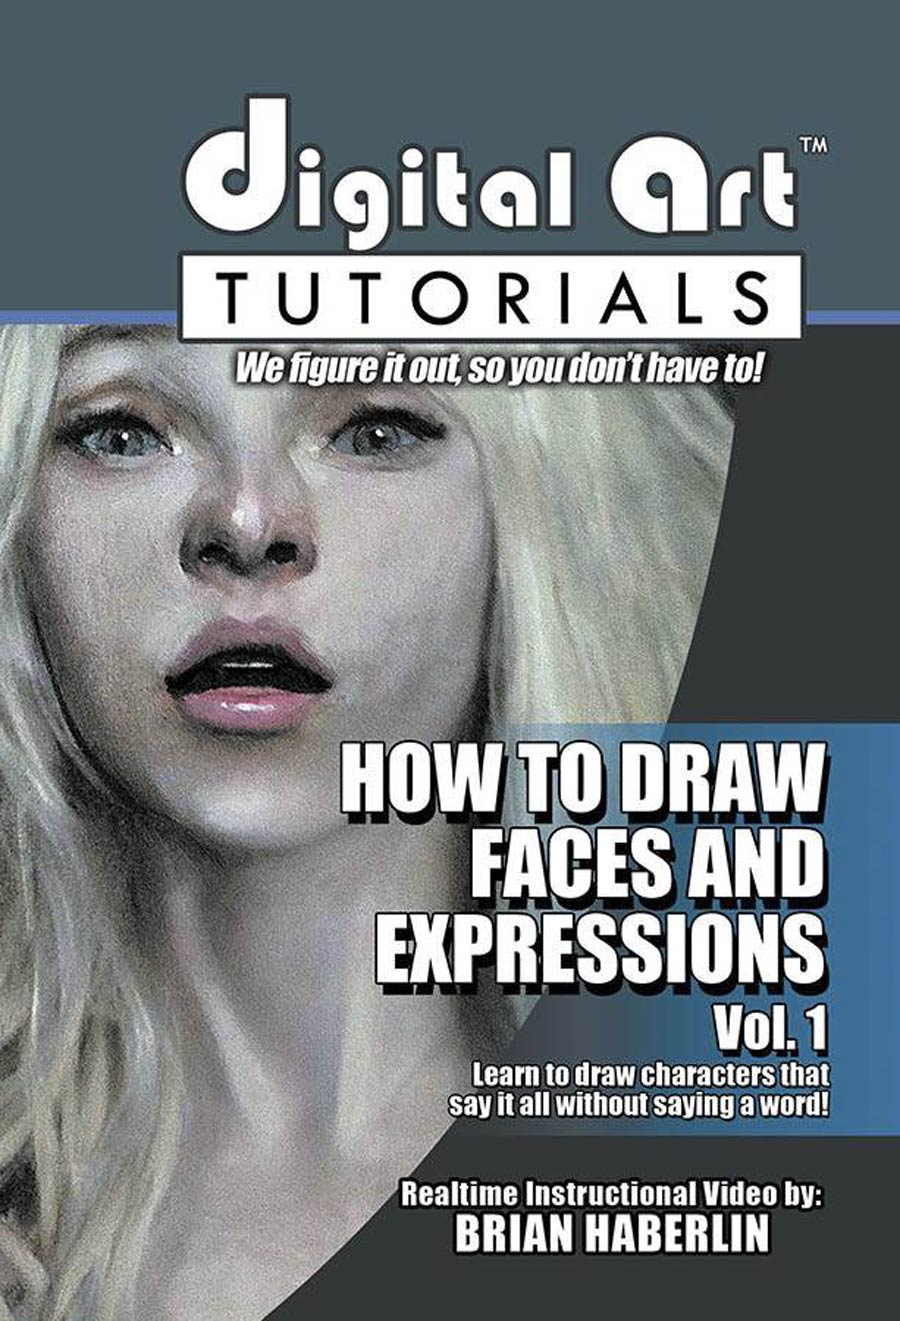 Digital Art Tutorials How To Draw Faces And Expressions Vol 1 CD-ROM